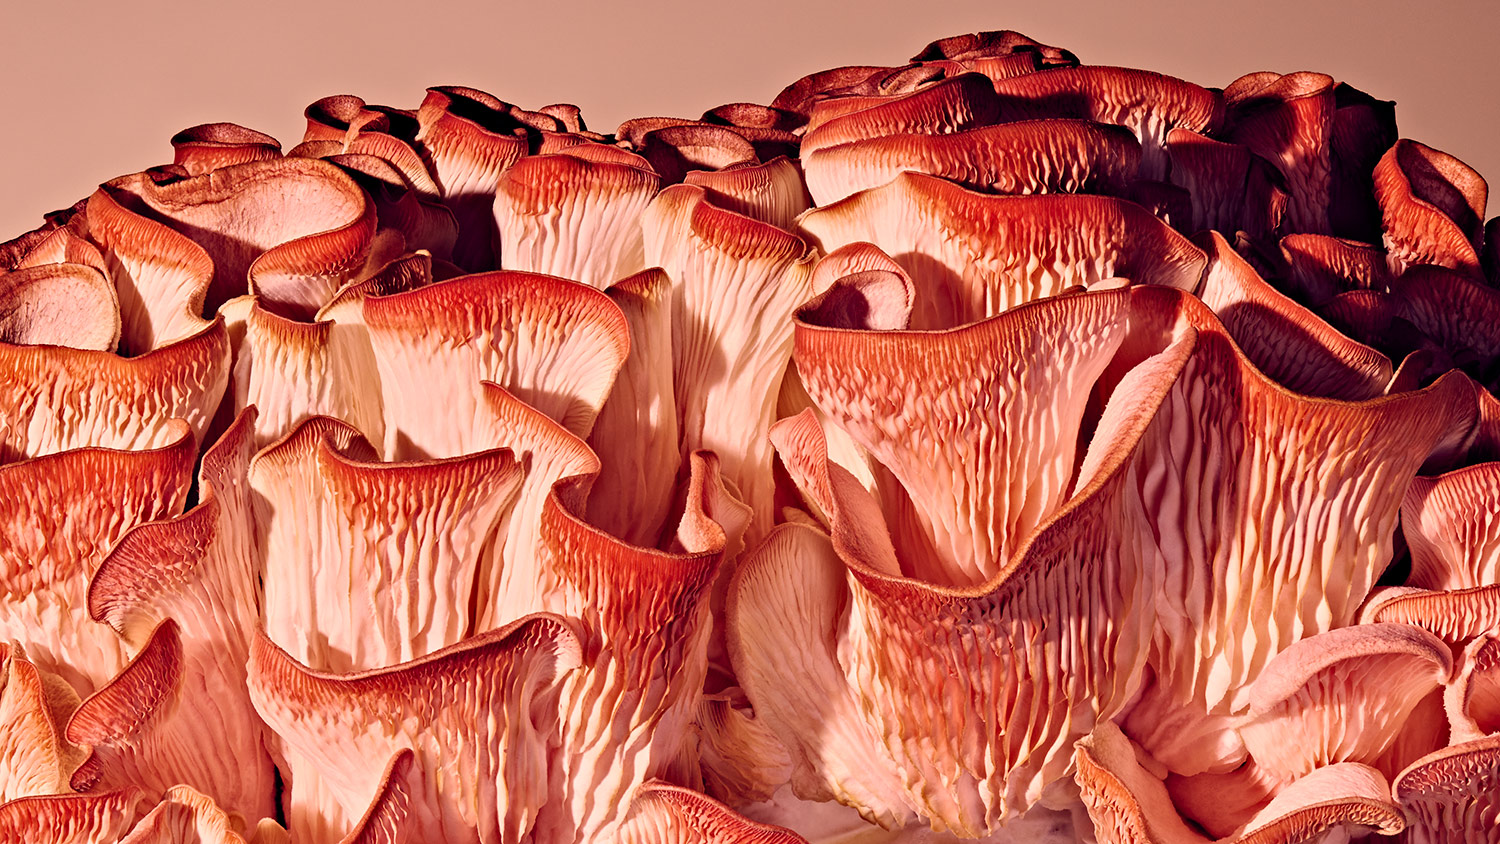 How to use the power of mushrooms to improve your life